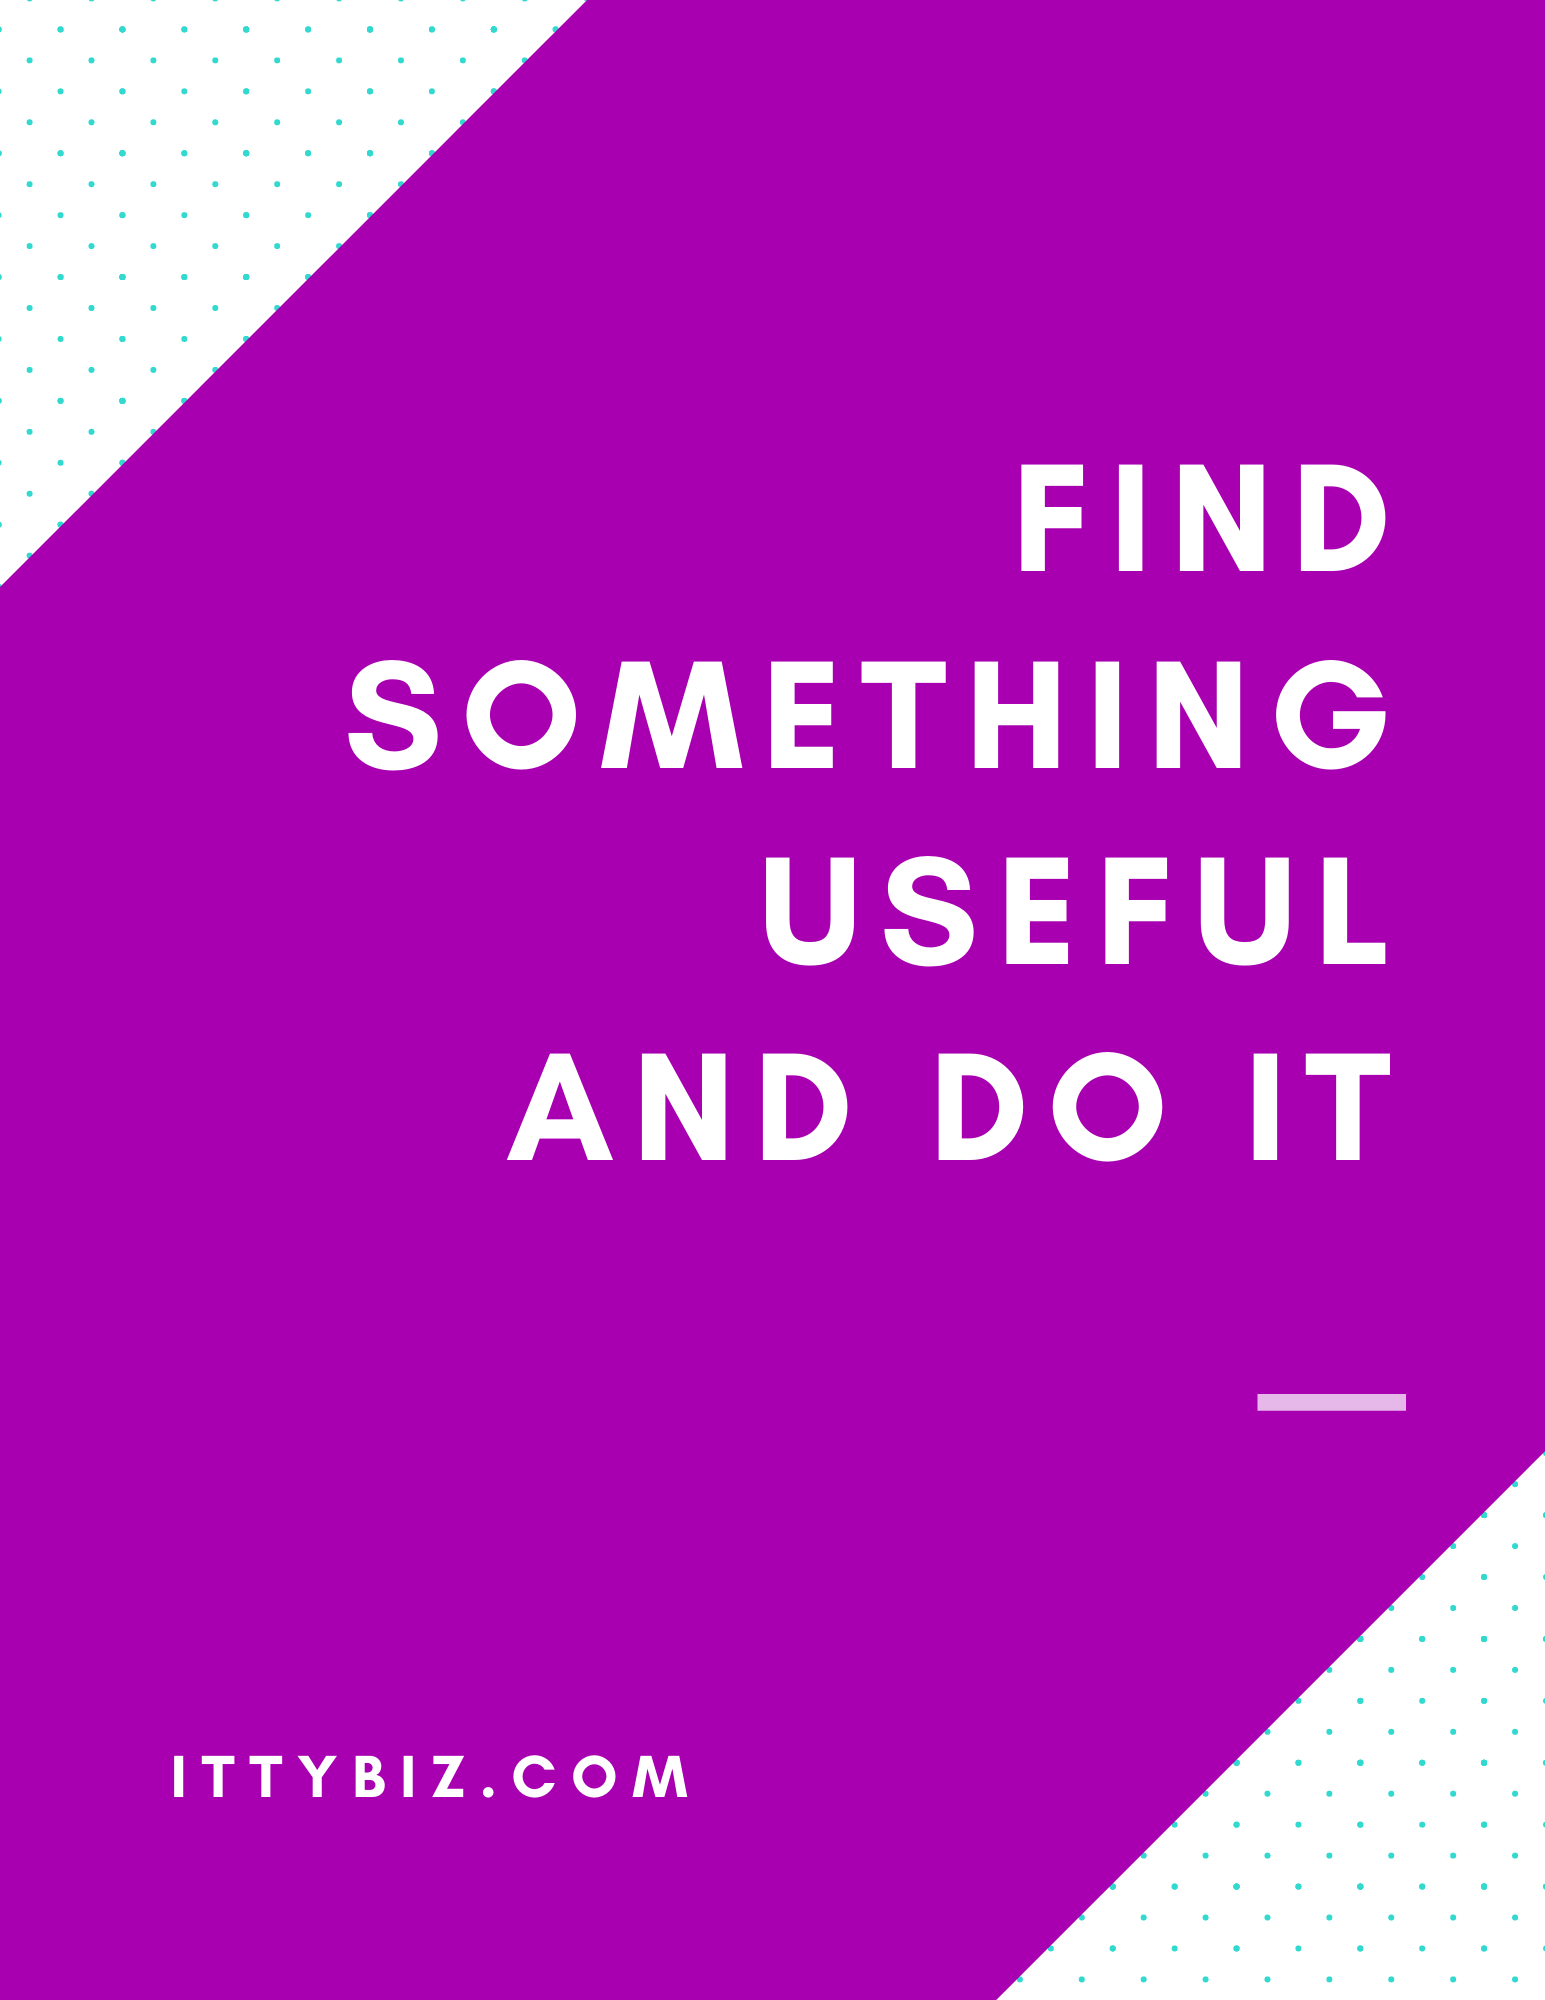 Find Something Useful and Do It